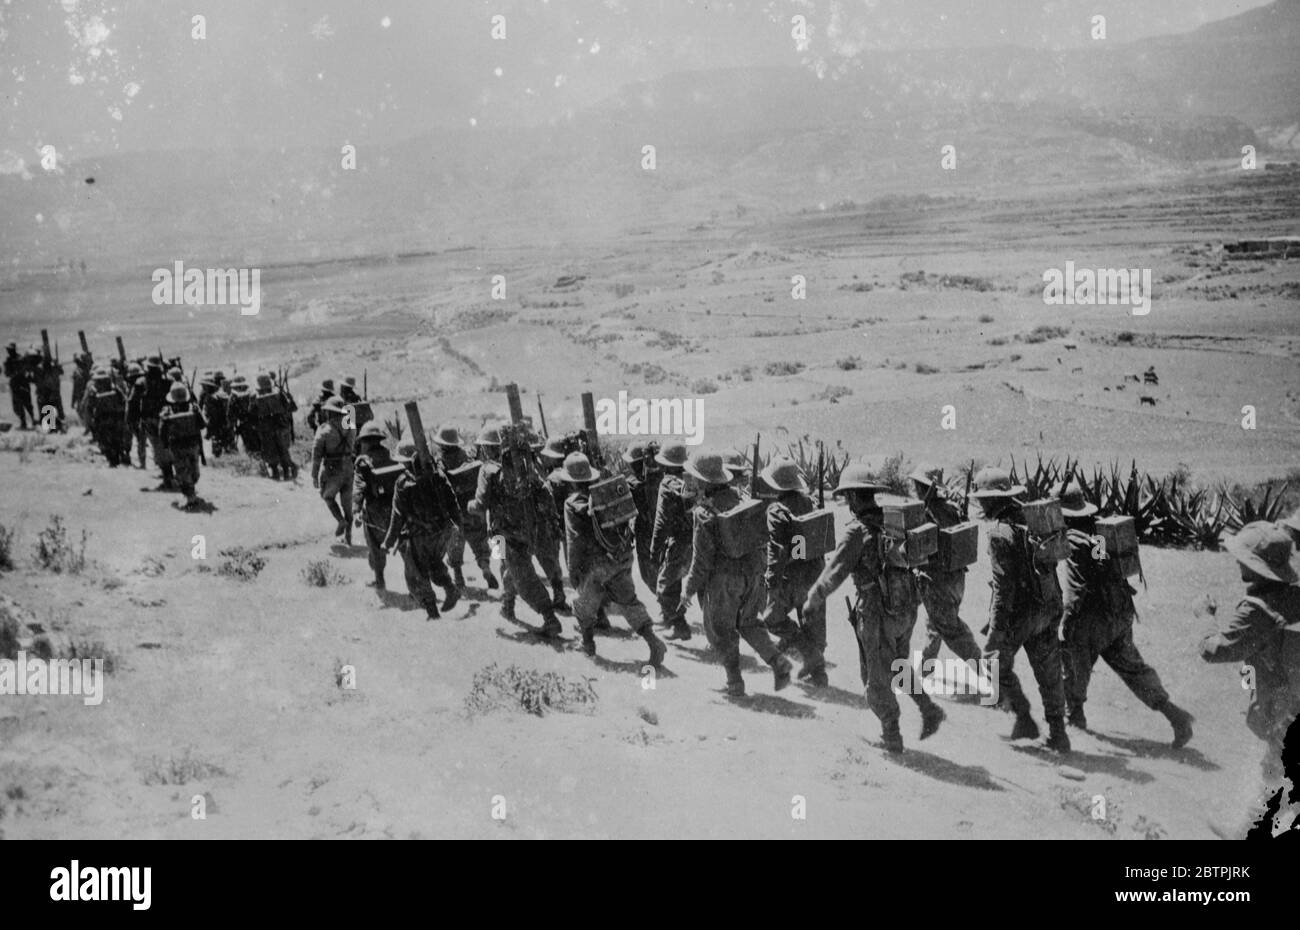 Troops march through desert . A column of Italian troops carrying heavy guns and equipment on their backs marching through the desert during the advance in the Adigrat sector . 26 October 1935 Stock Photo